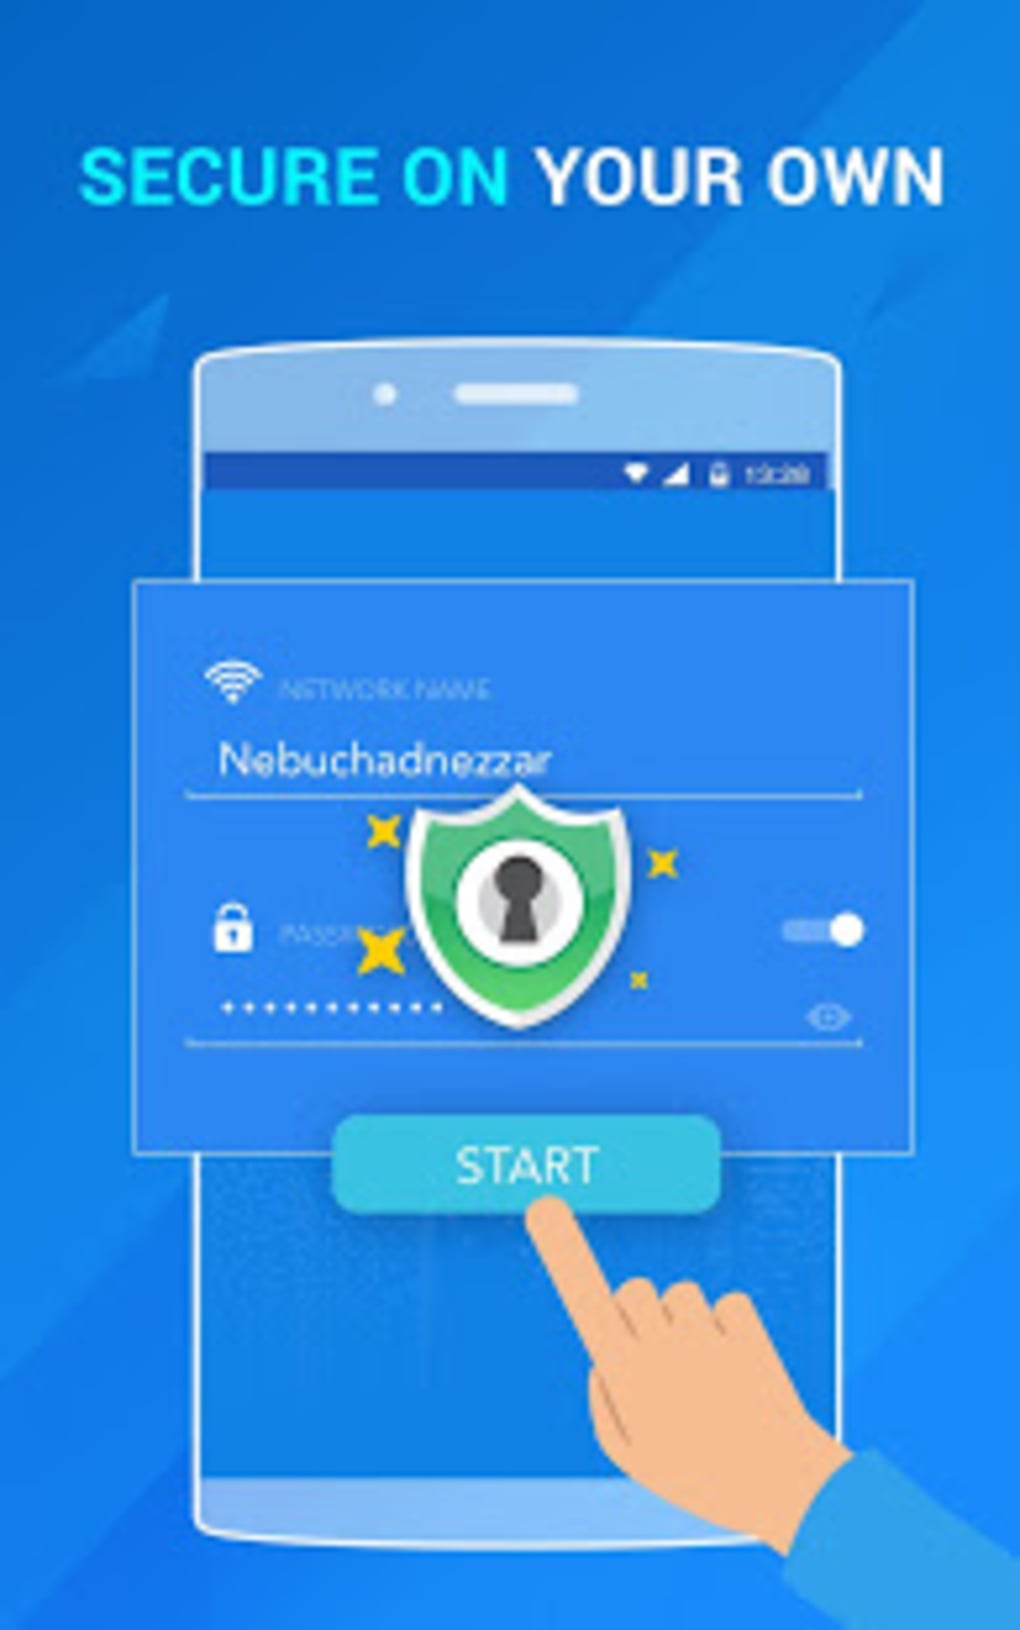 connectify hotspot free download 2019